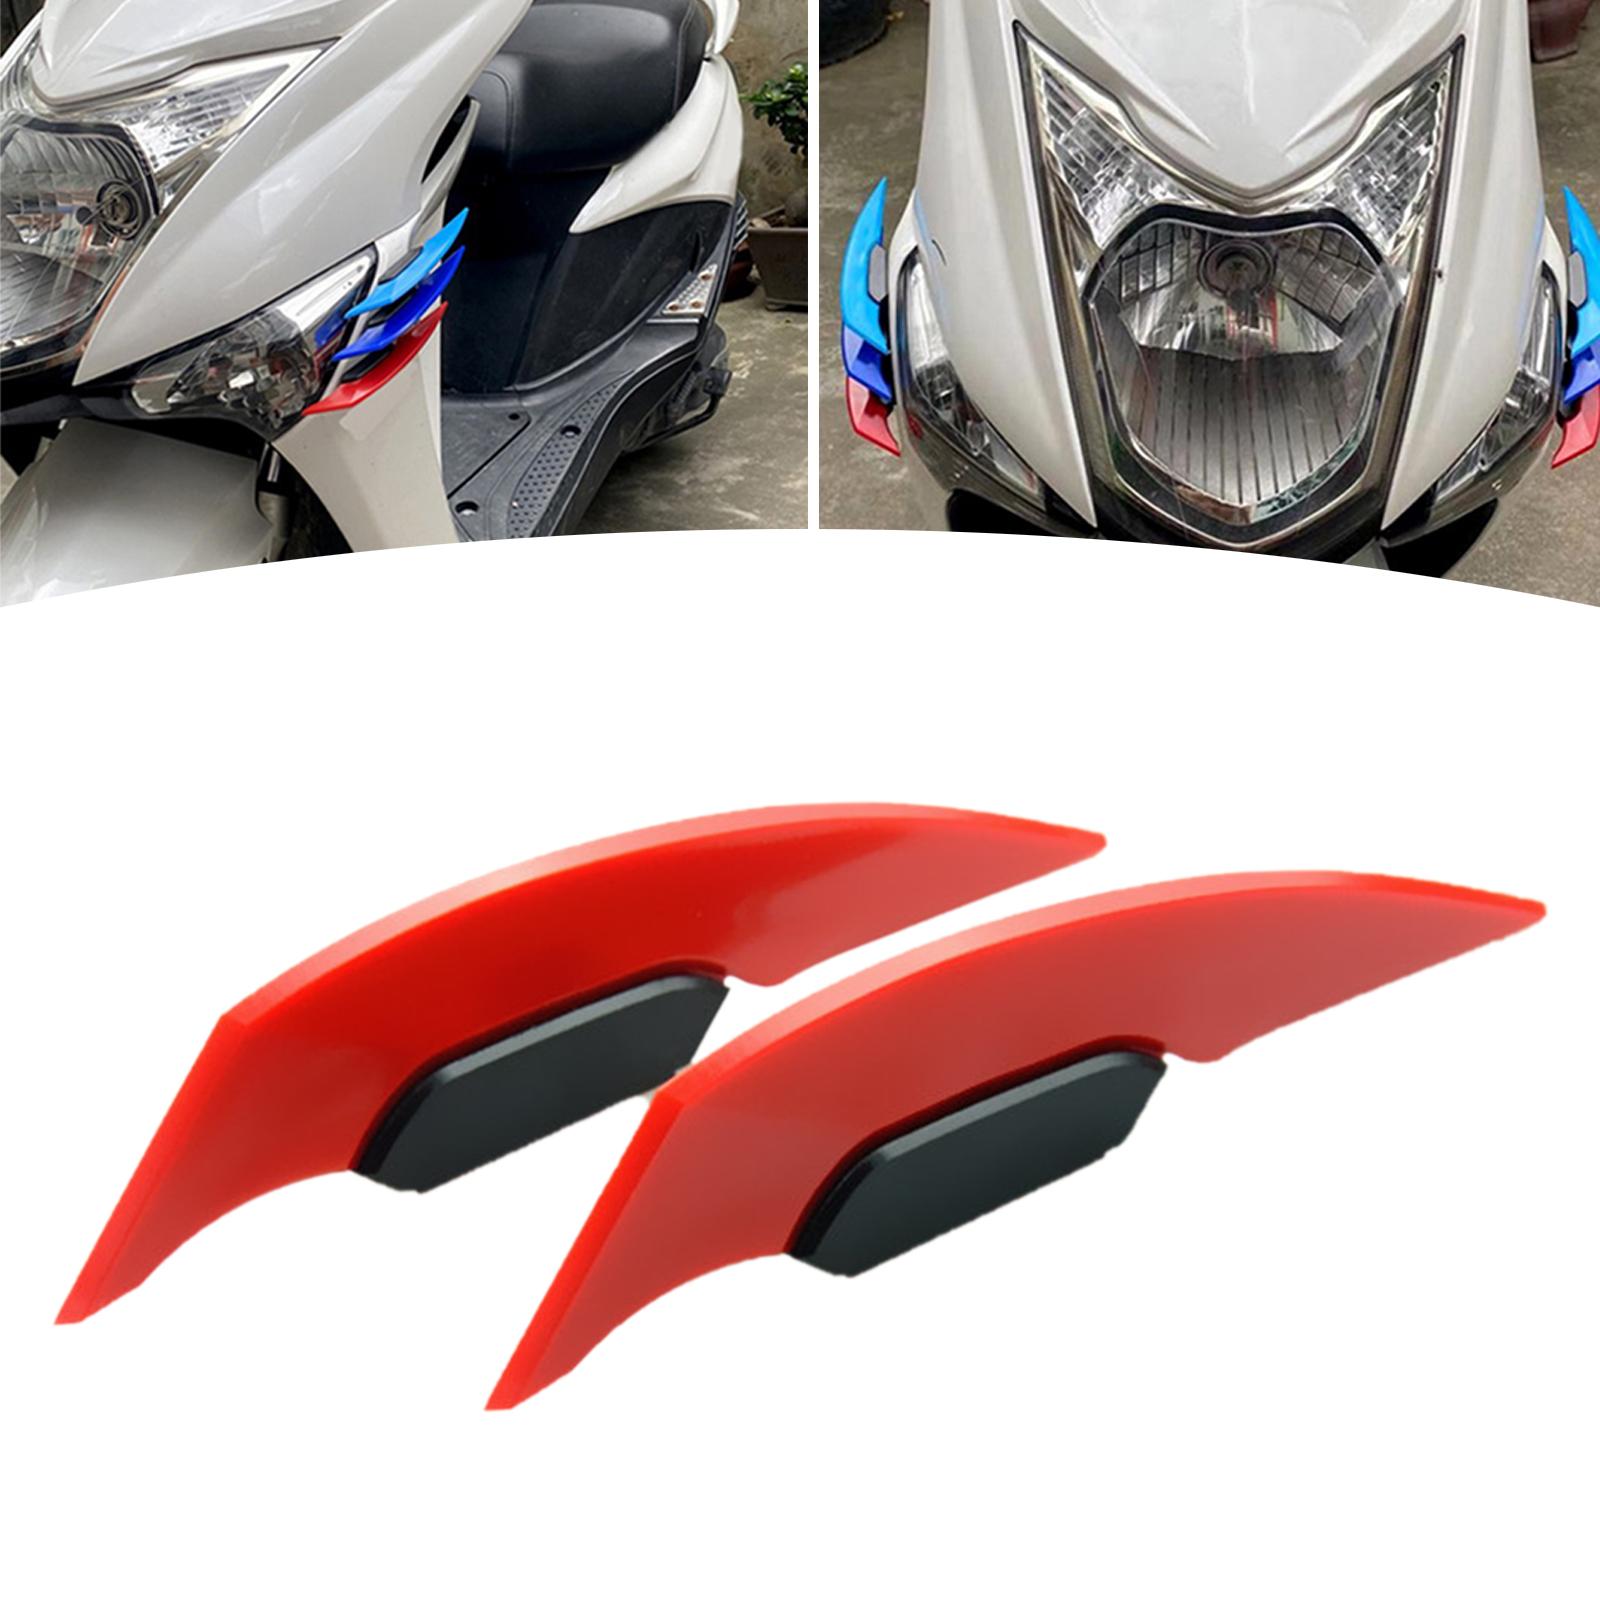 Motorcycle Winglet Aerodynamic Spoiler Wing Fit for Electric Motorcycles Red